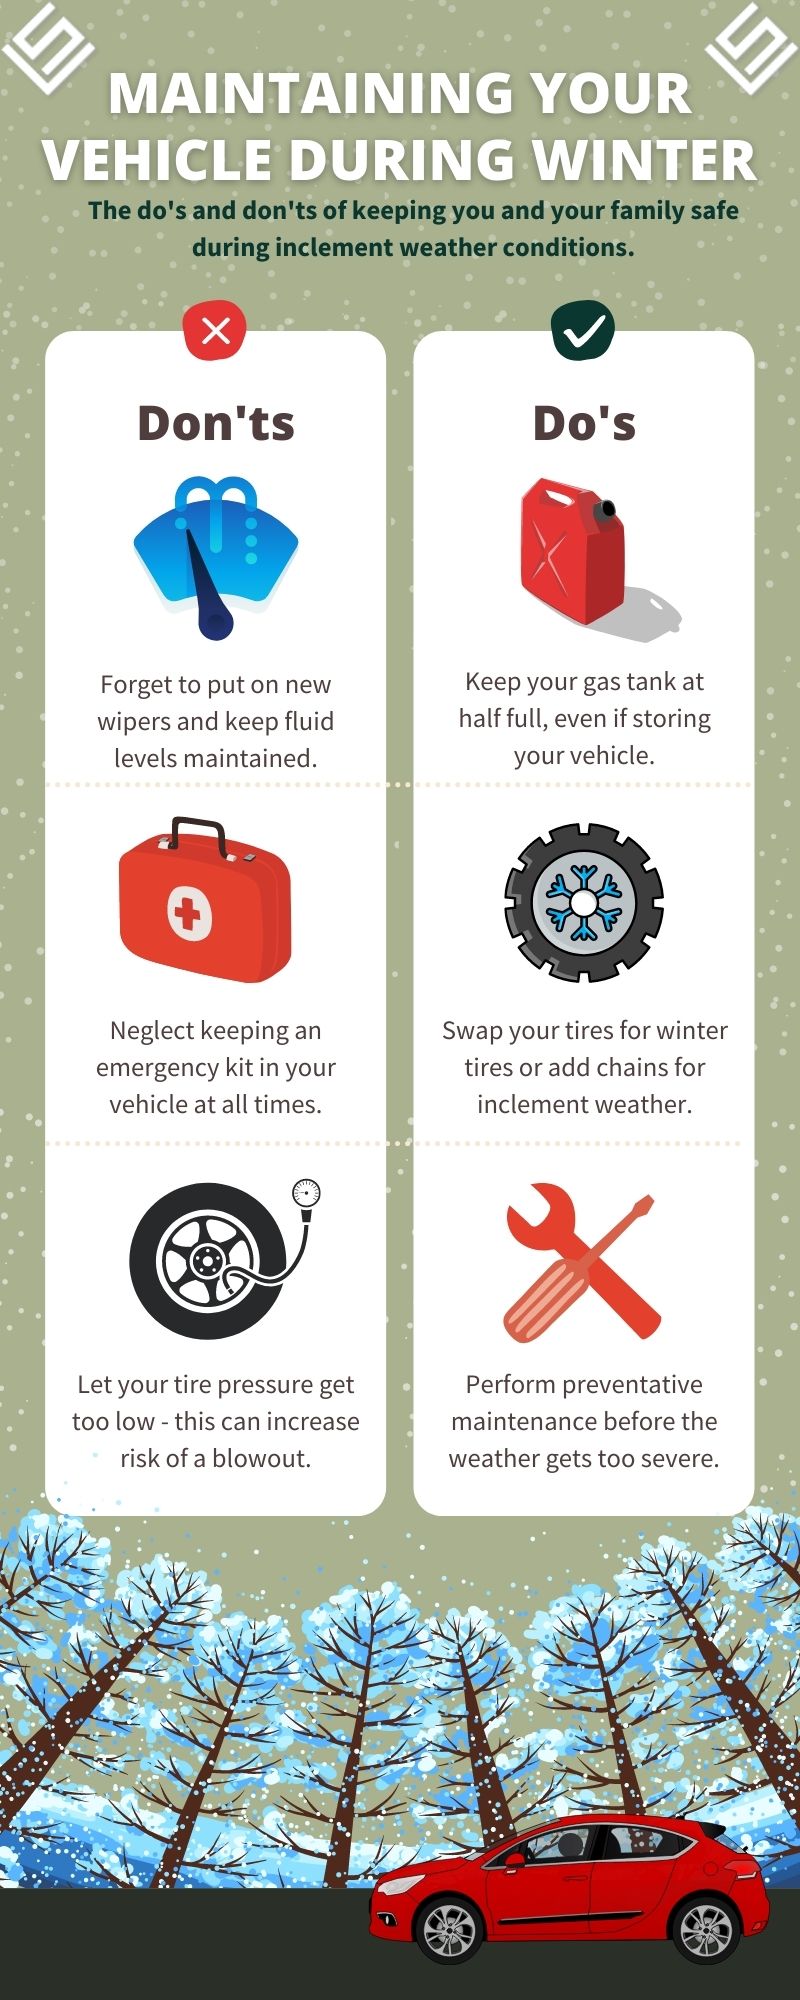 Maintaining Your Vehicle During Winter